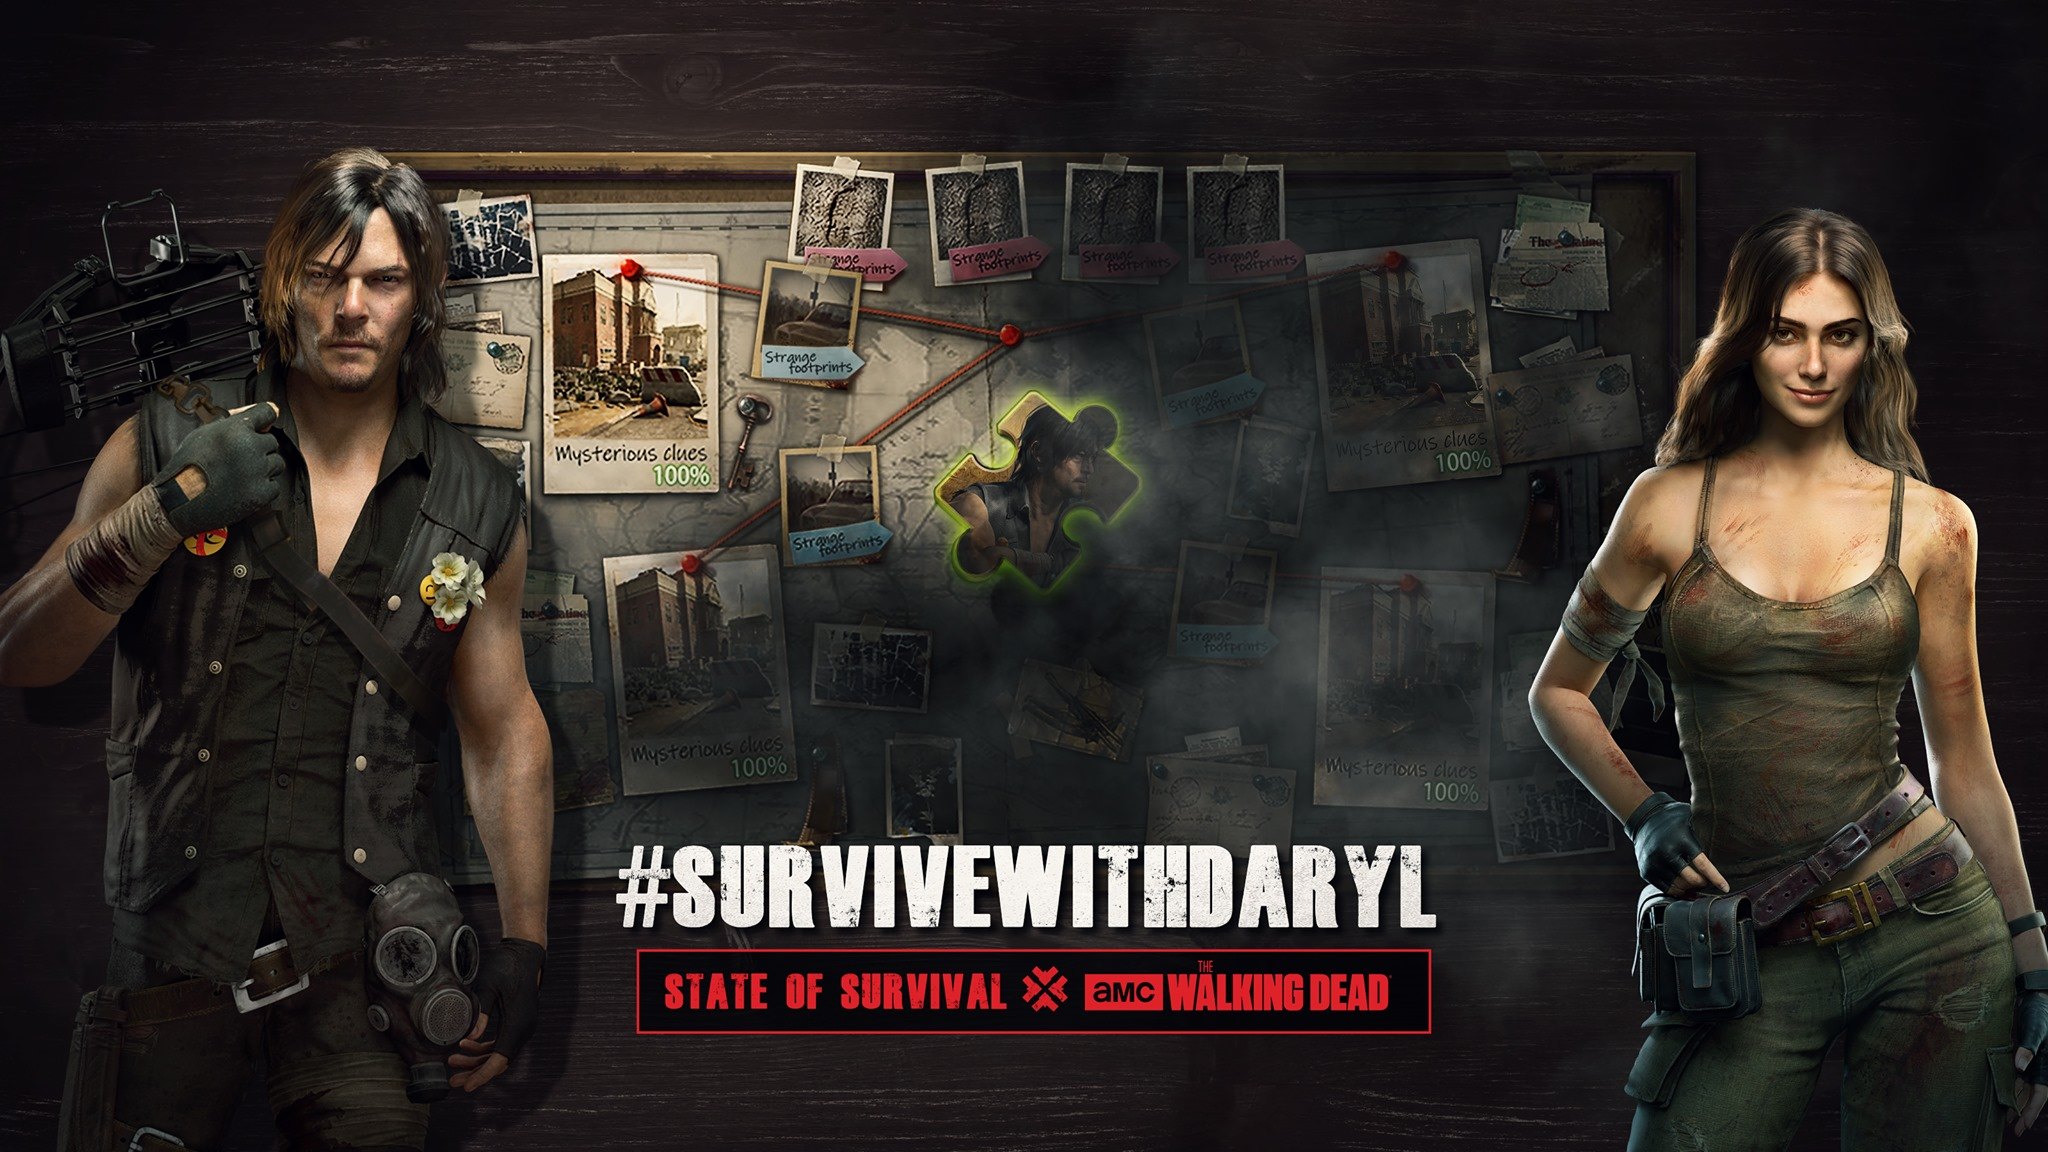 State of Survival add The Walking Dead’s Daryl character to the game in